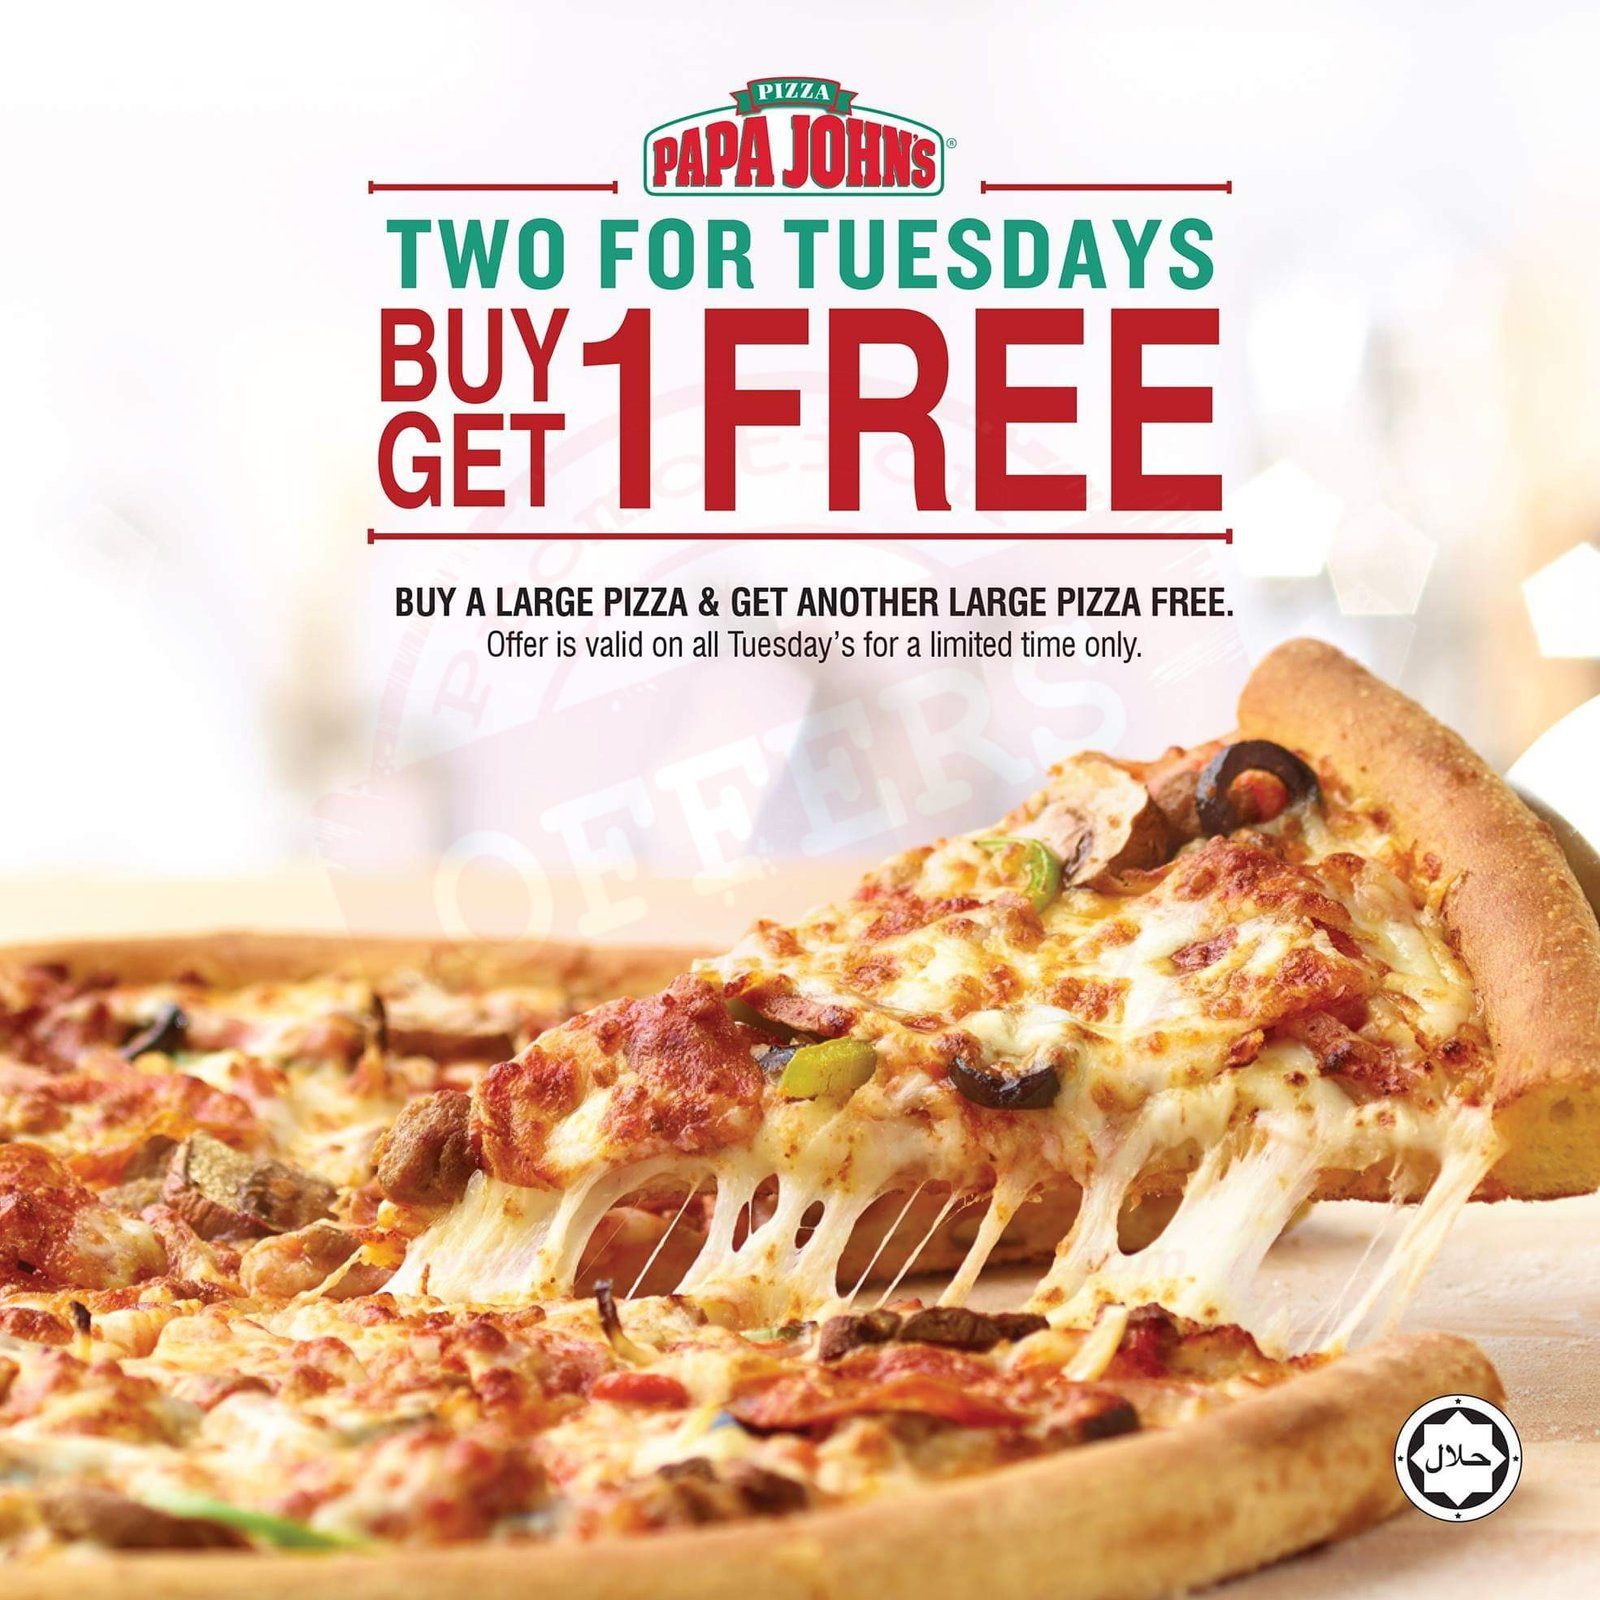 Deal of the day – buy 1 get 1 Large ? FREE!  #PapaJohnsUAE #PapaJohnsPizza #TwoForTuesdays